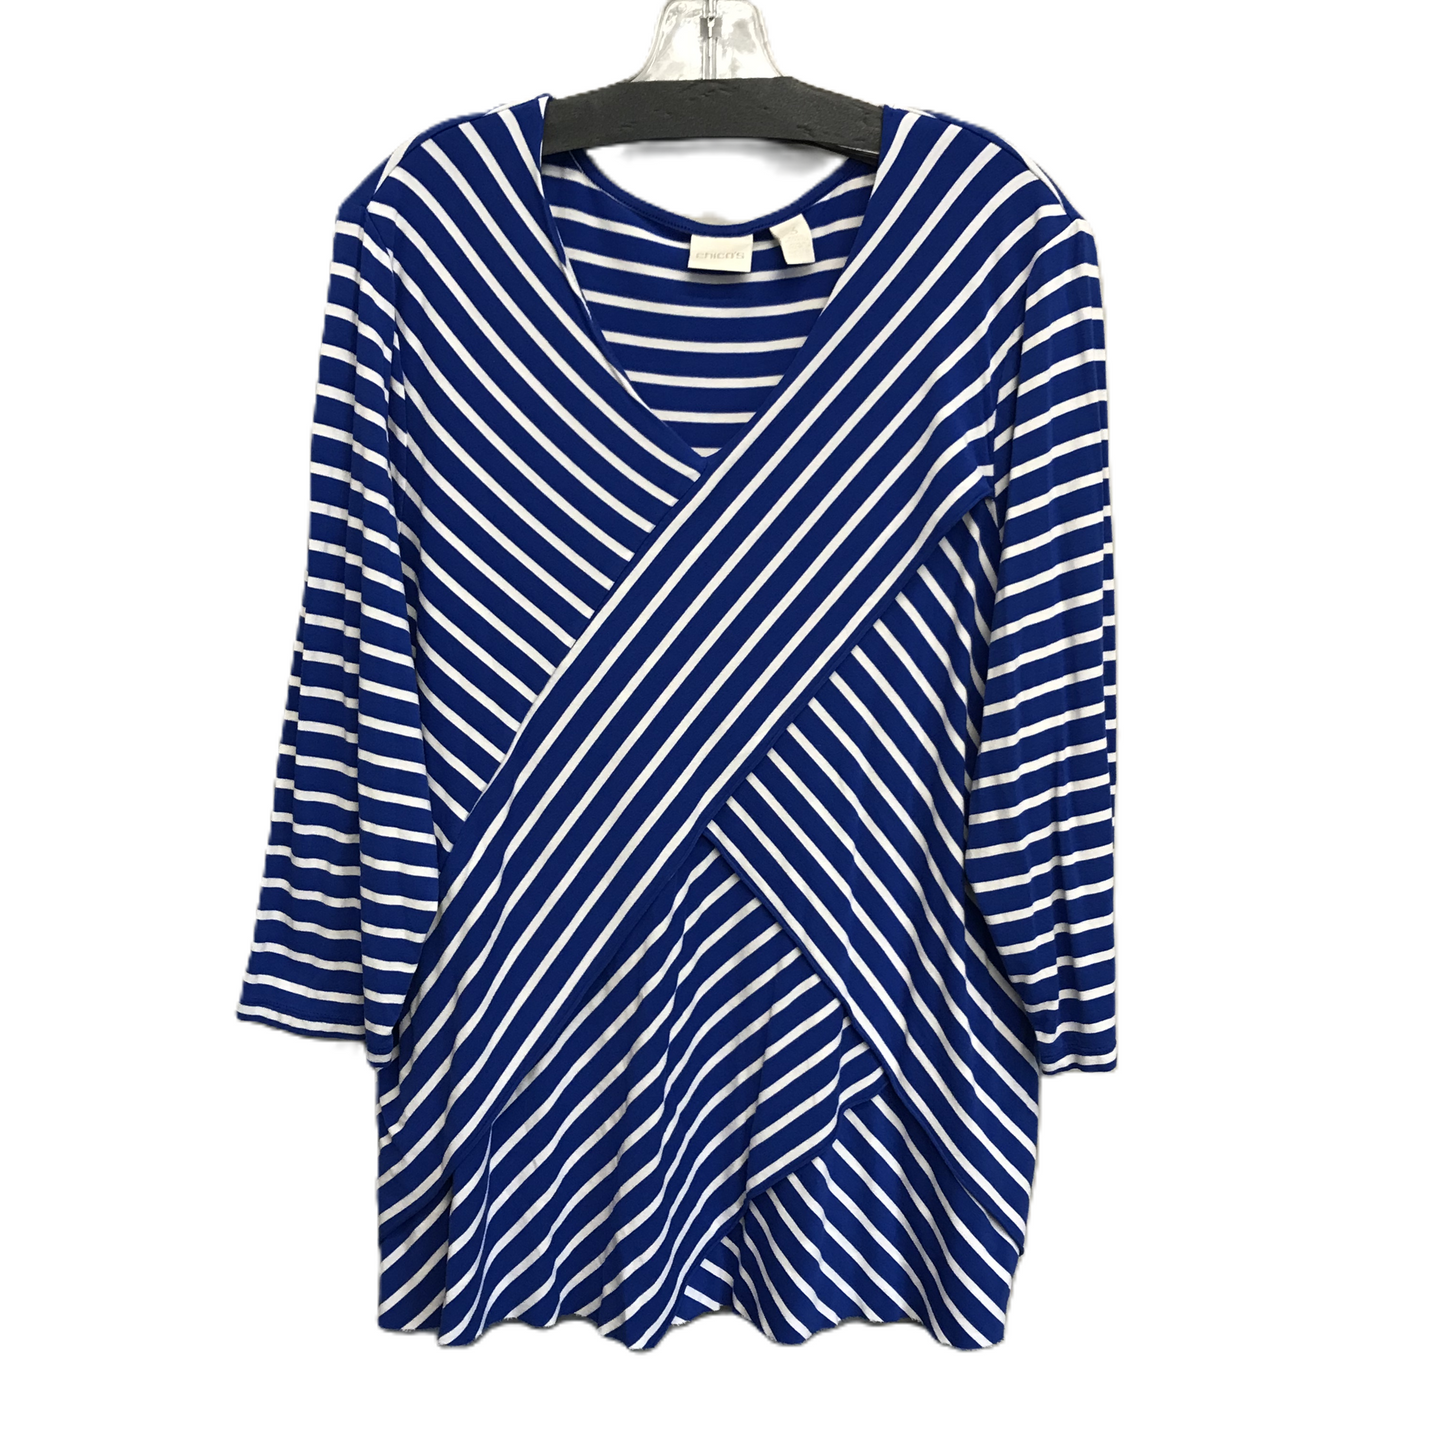 Striped Pattern Top Long Sleeve By Chicos, Size: Xl